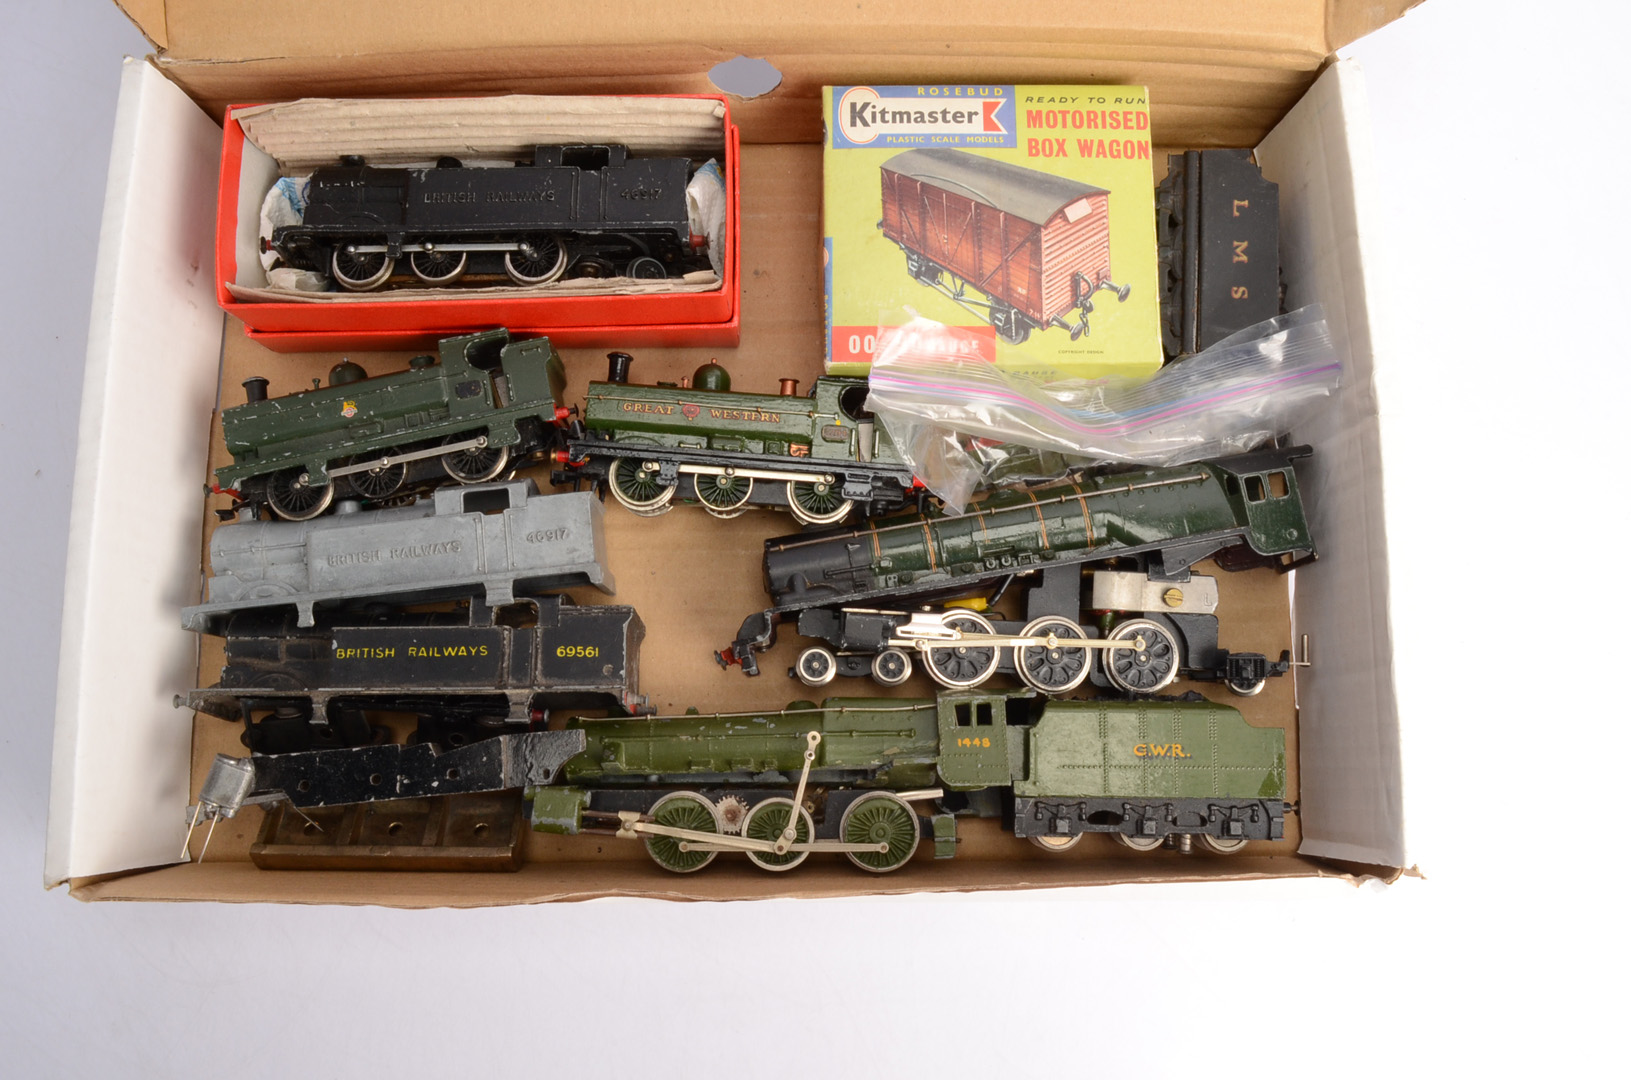 Kitmaster Trackmaster Tri-ang Hornby Dublo Gaiety and other 00 gauge Locomotives, Kitmaster